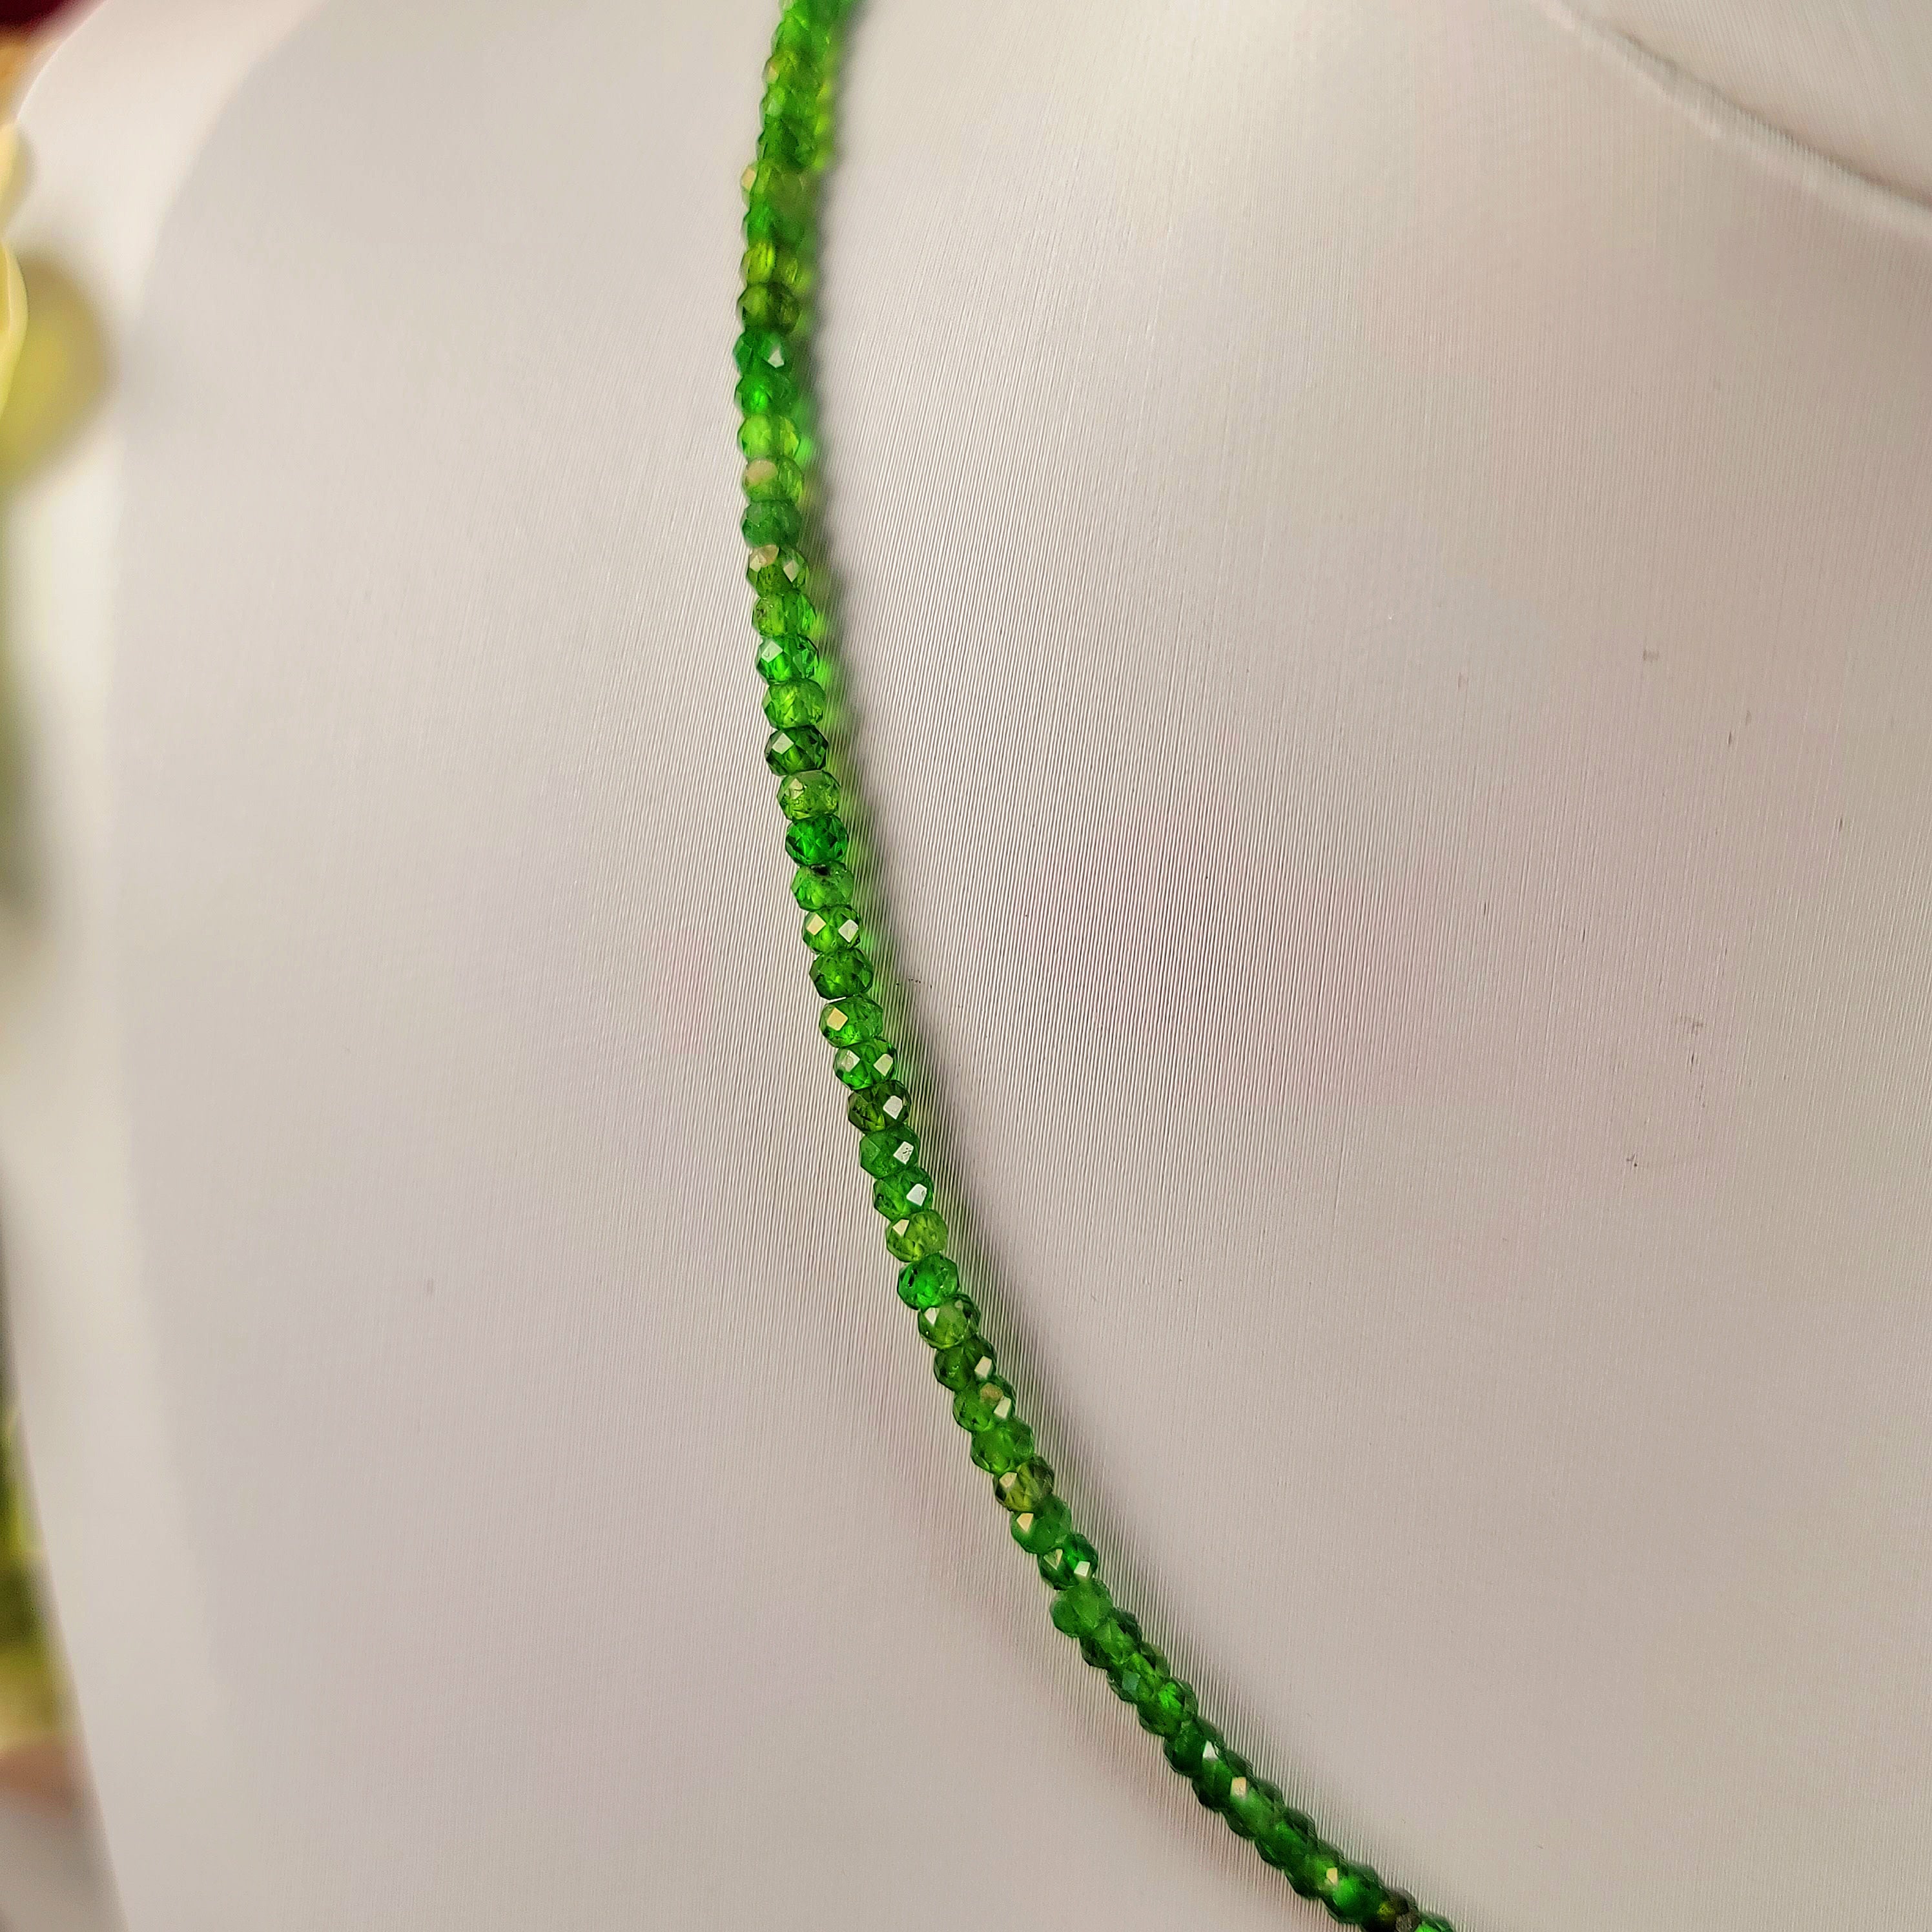 Chrome Diopside Micro Faceted Choker .925 Silver for Emotional Healing and Forgiveness